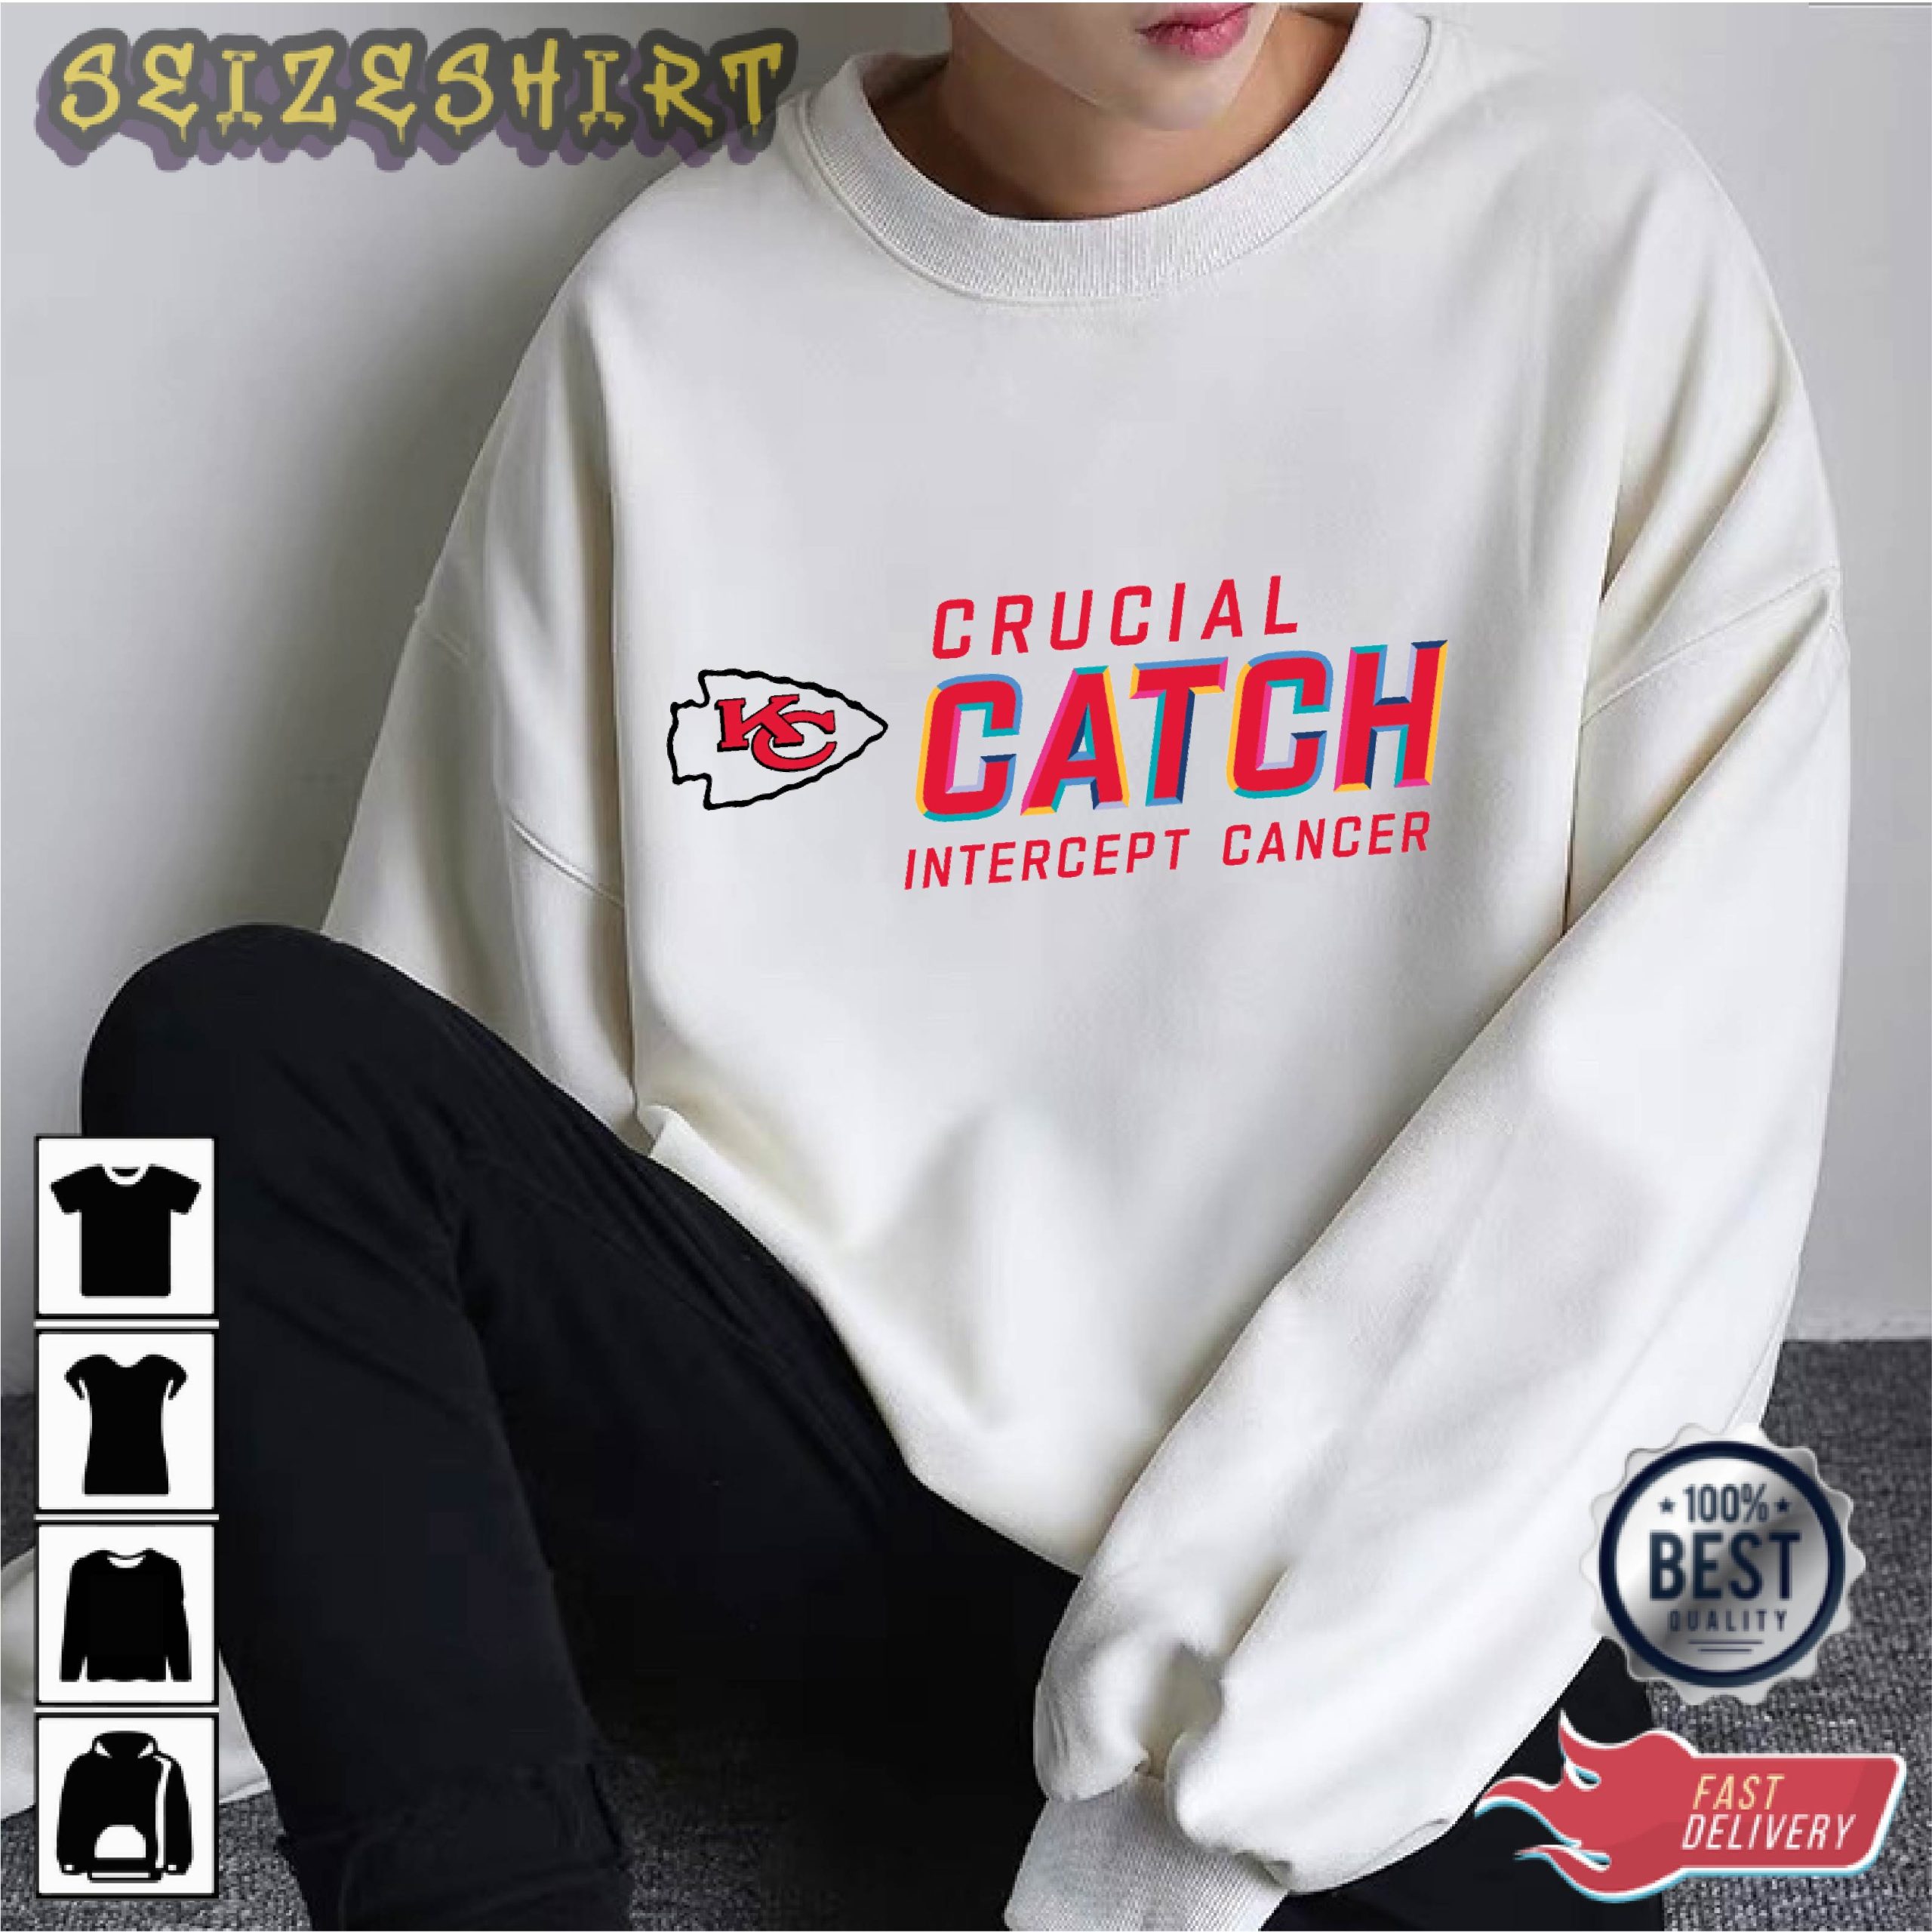  Intercept Cancer Crucial Catch Apparel 2022 Hottopic Graphic Tee